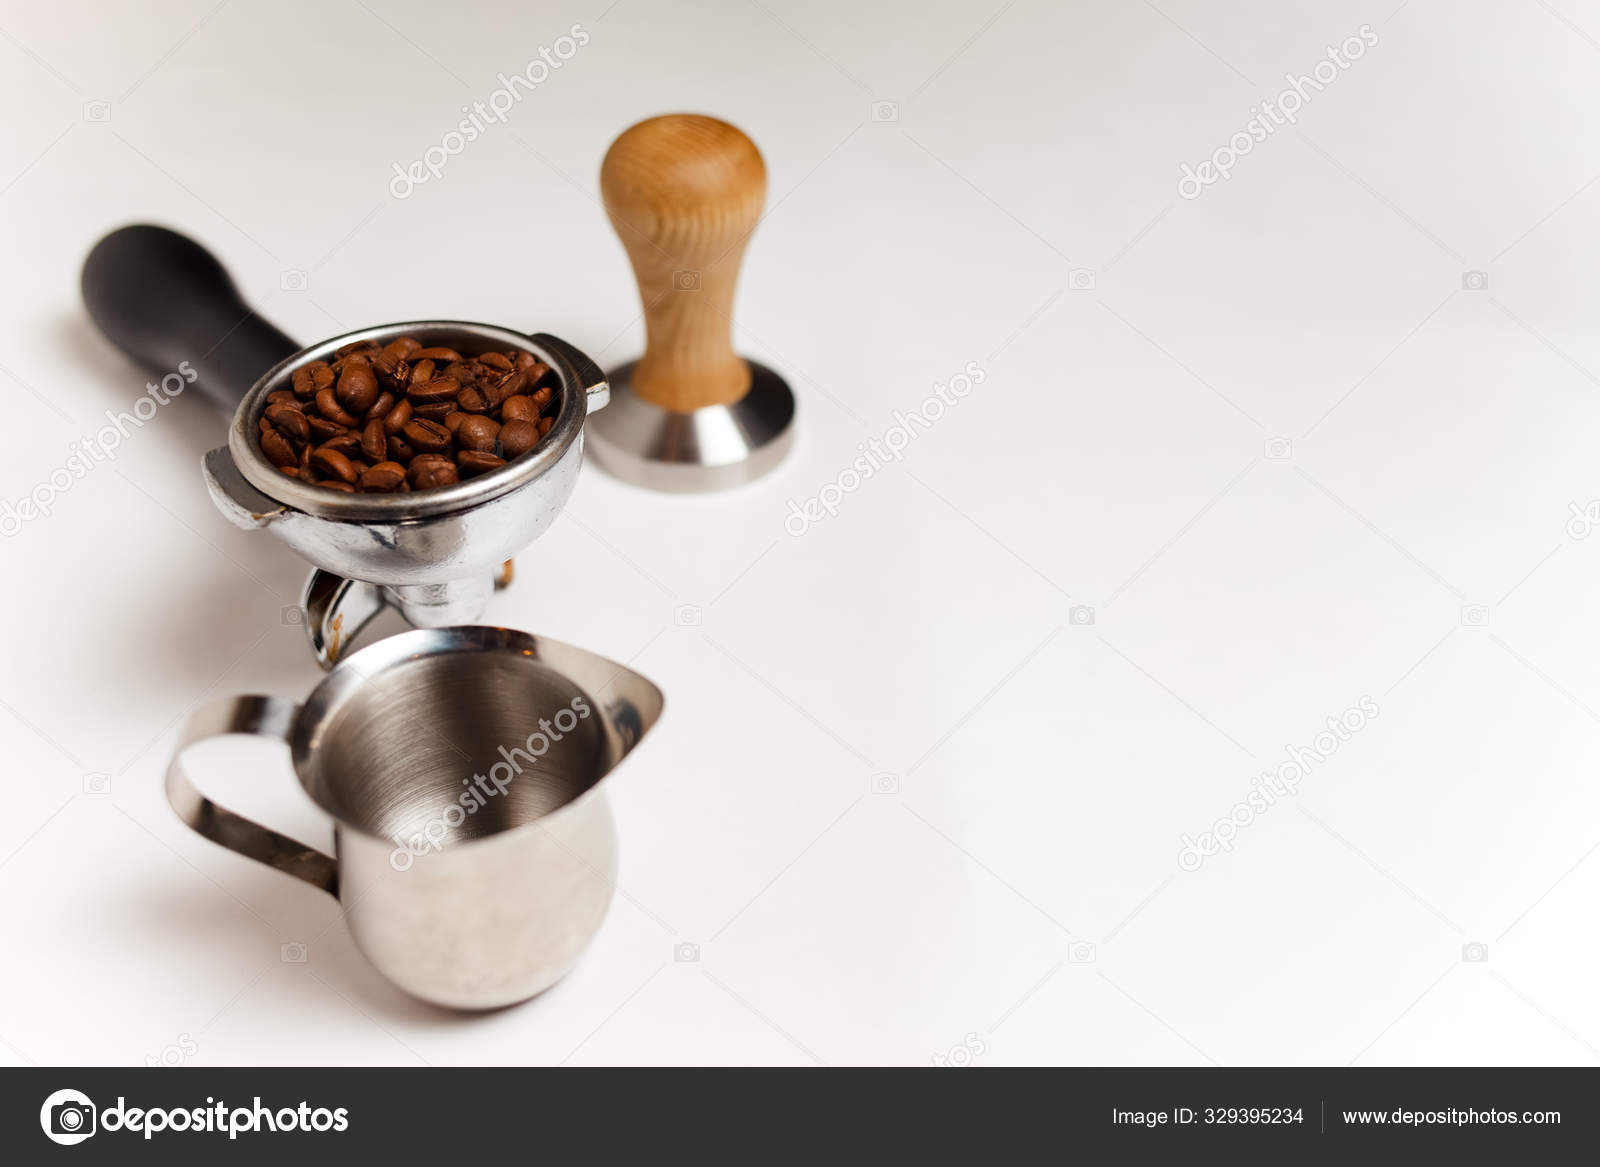 Professional Coffee Making Accessories Concept Stock Photo by  ©borodai.andrii 329395234